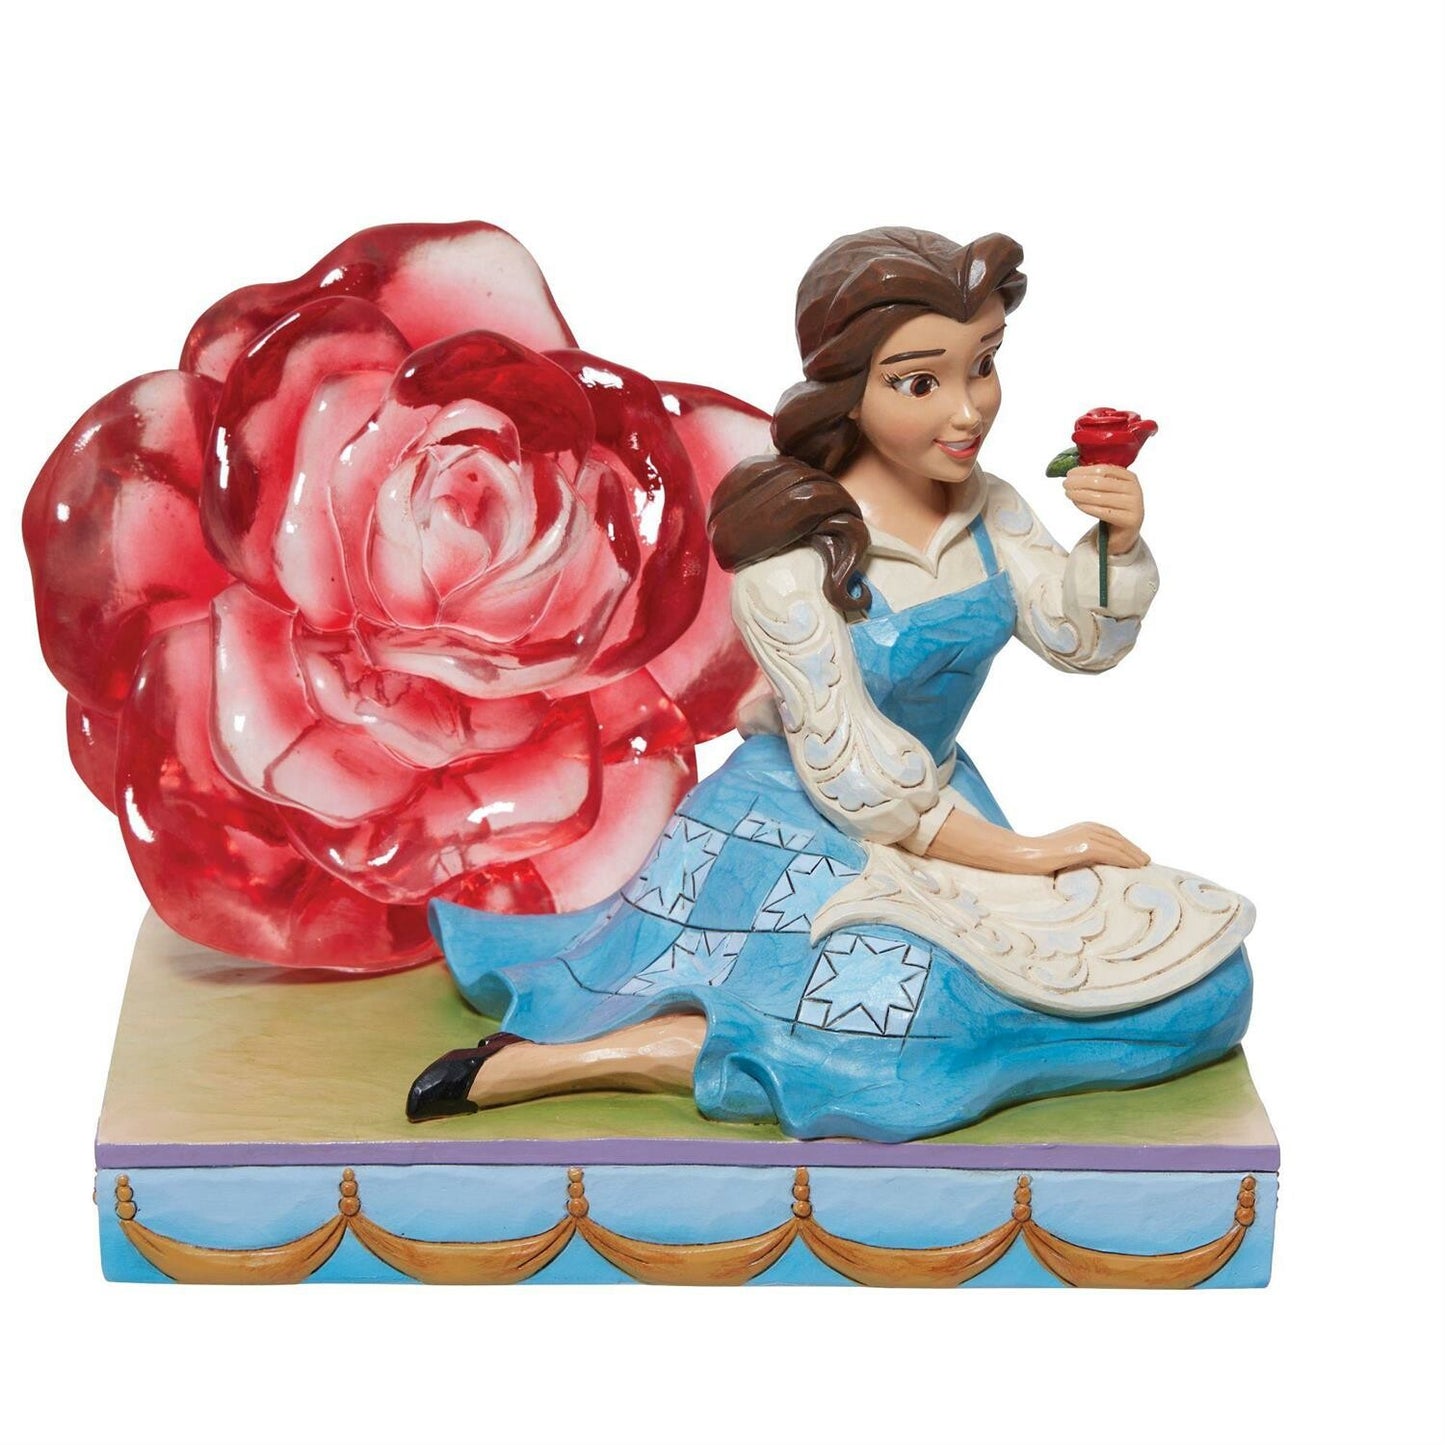  Disney Traditions Beauty and the Beast Clear Rose Bauble 